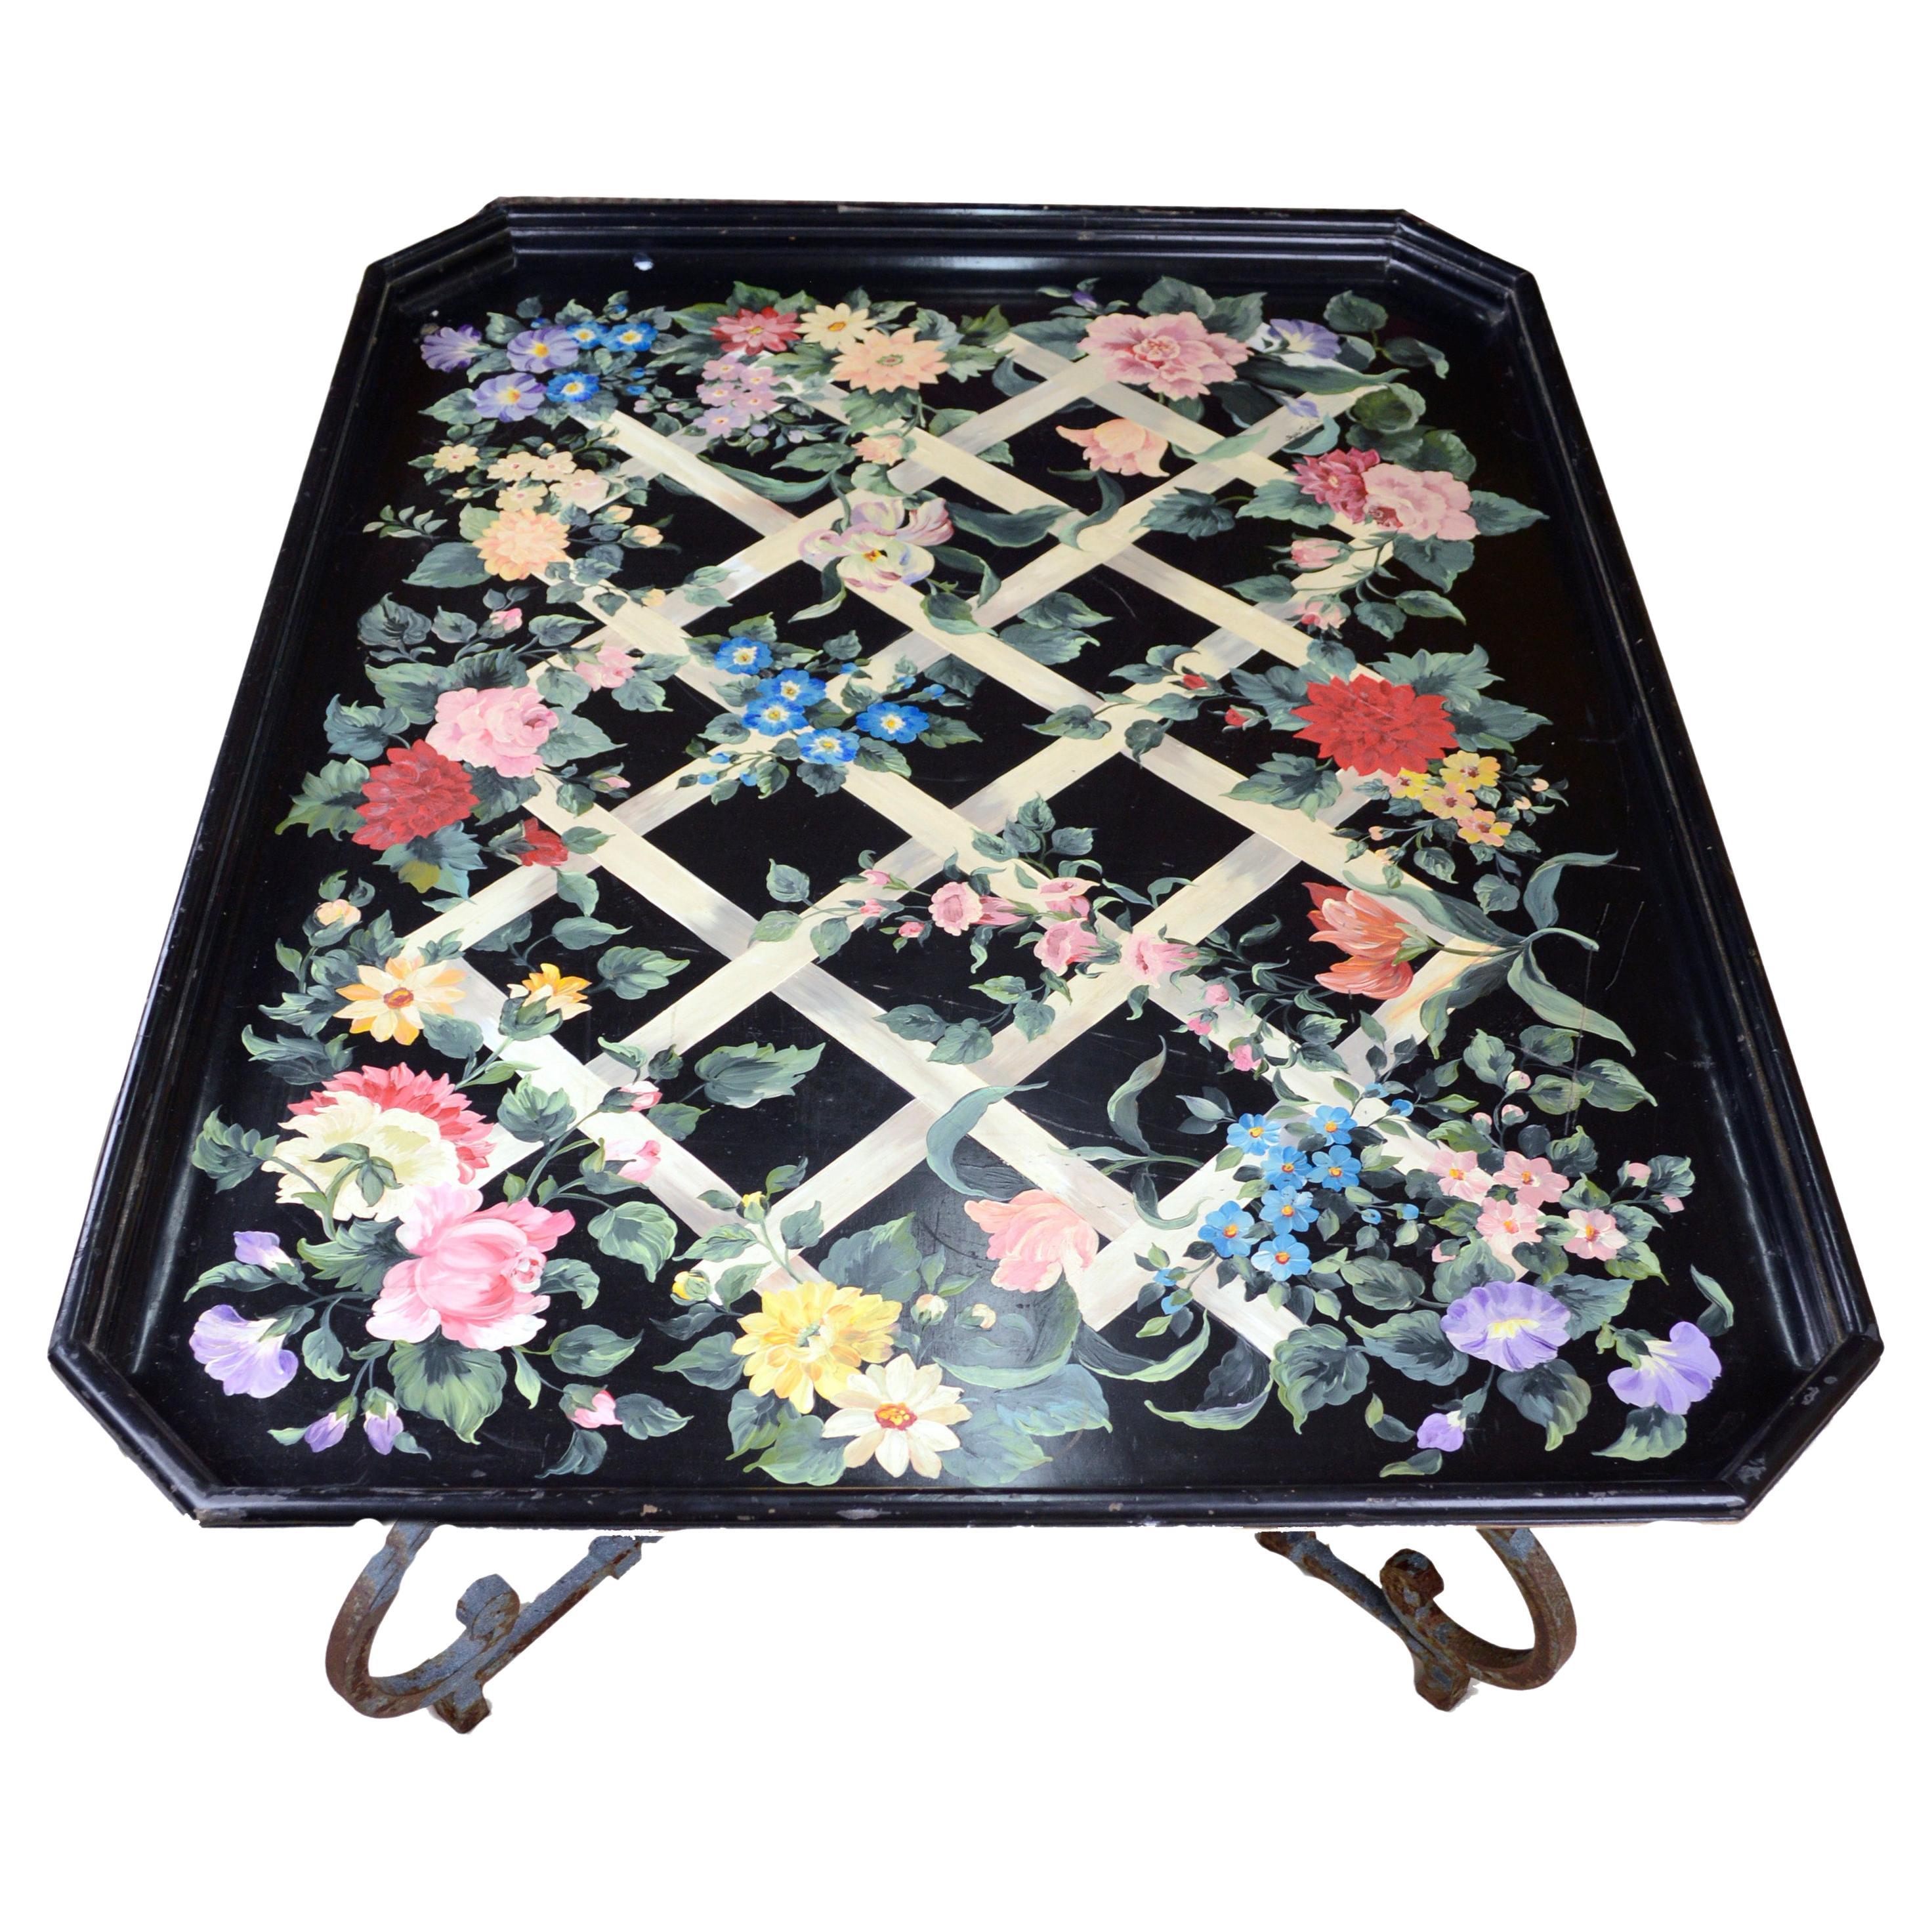 Tole Painting Lattice Work design Large Tray Table Painted by Shari Tipich For Sale